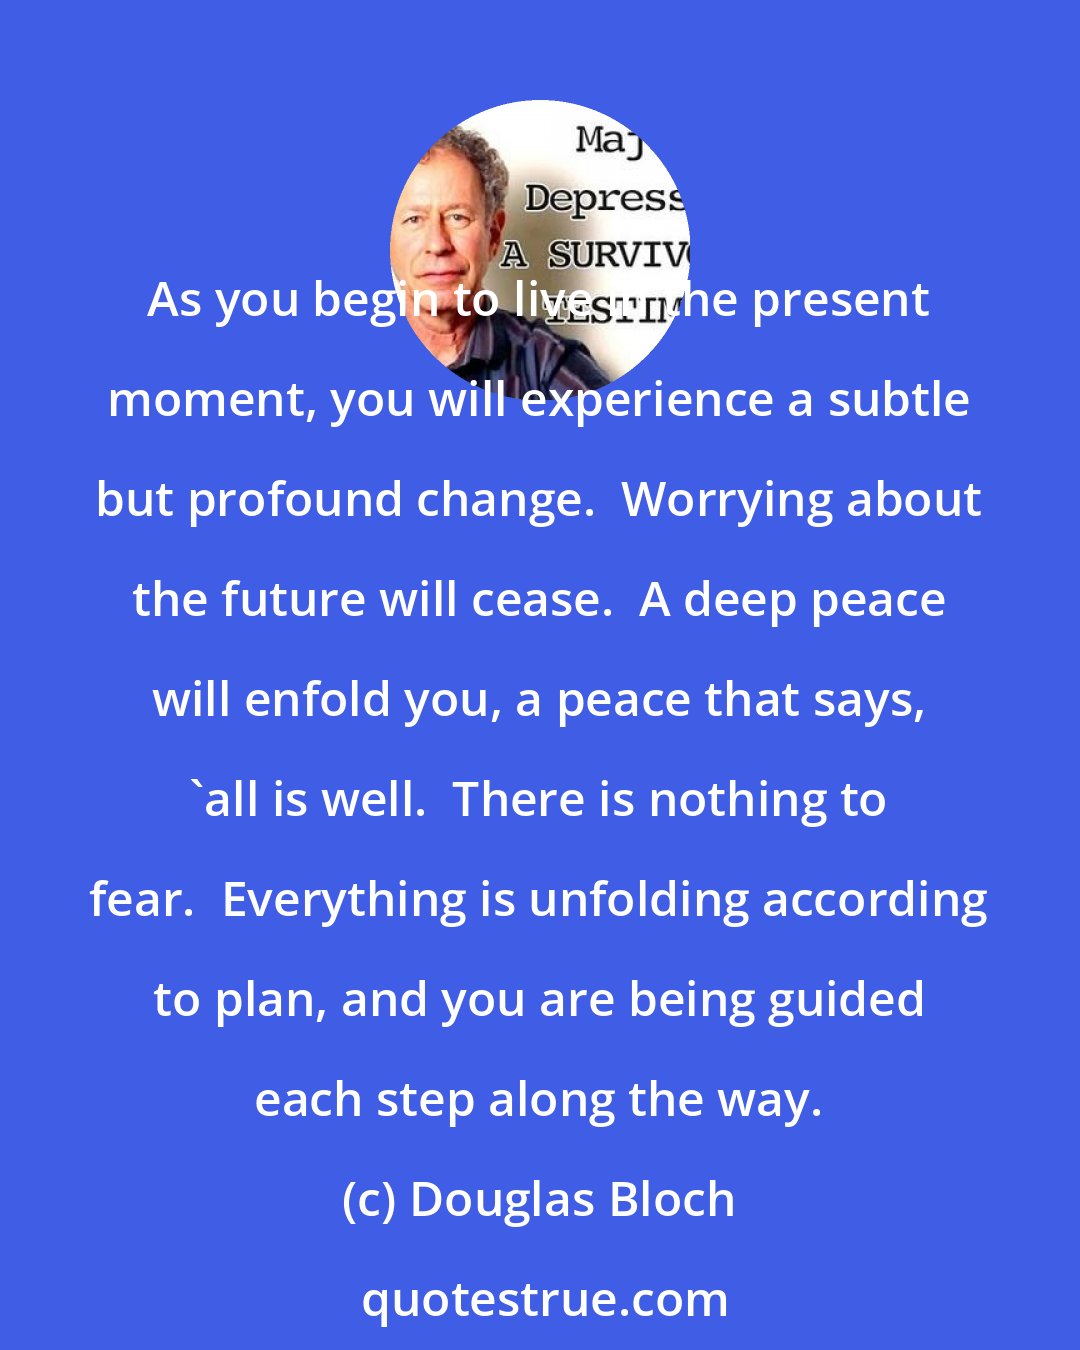 Douglas Bloch: As you begin to live in the present moment, you will experience a subtle but profound change.  Worrying about the future will cease.  A deep peace will enfold you, a peace that says, 'all is well.  There is nothing to fear.  Everything is unfolding according to plan, and you are being guided each step along the way.